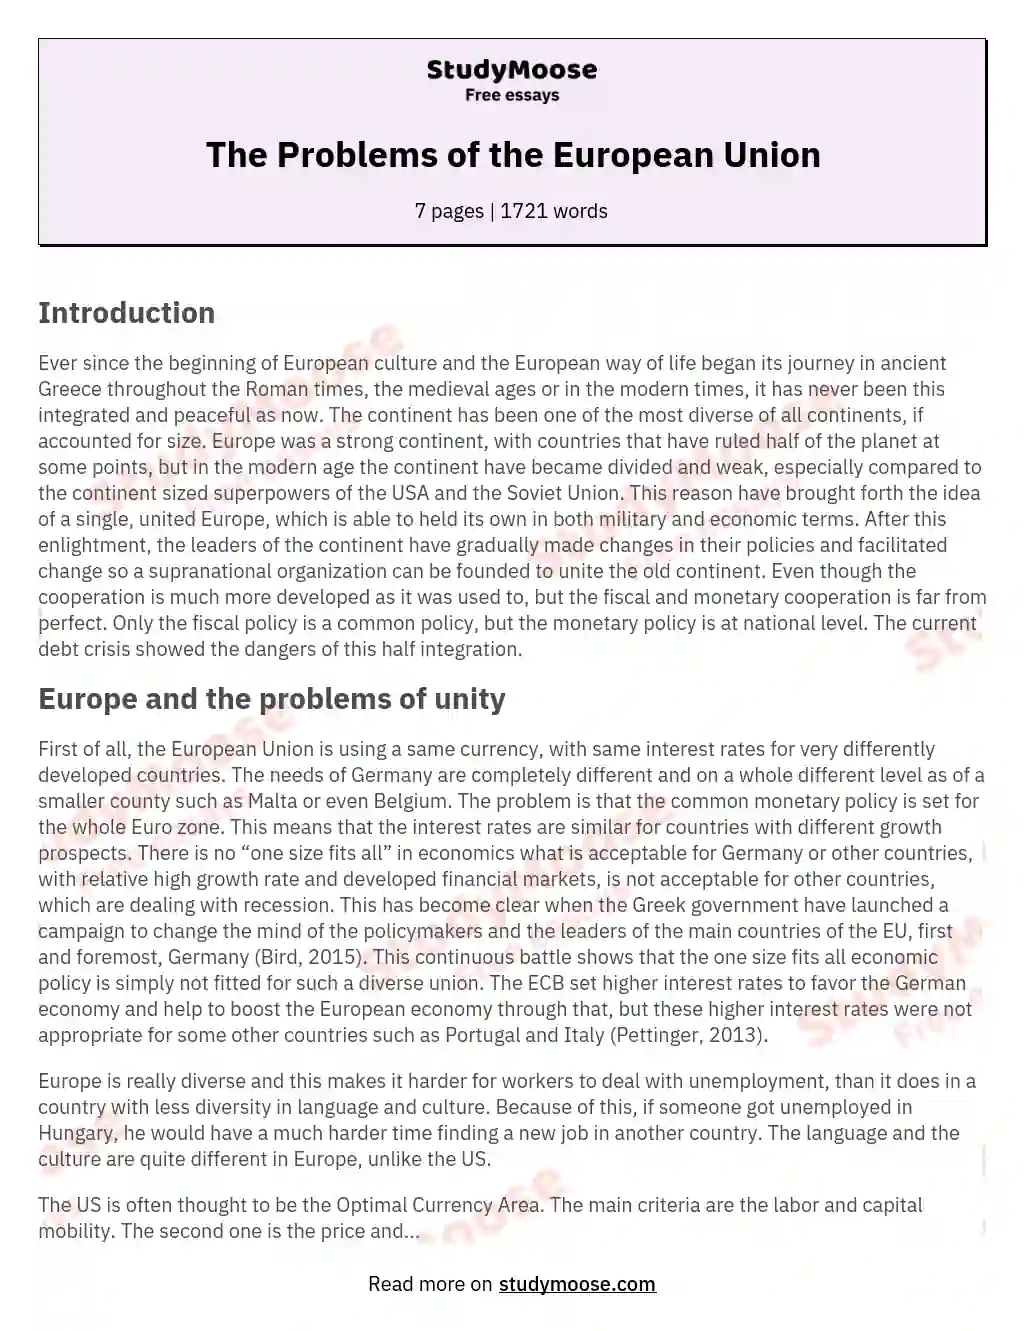 The Problems of the European Union essay